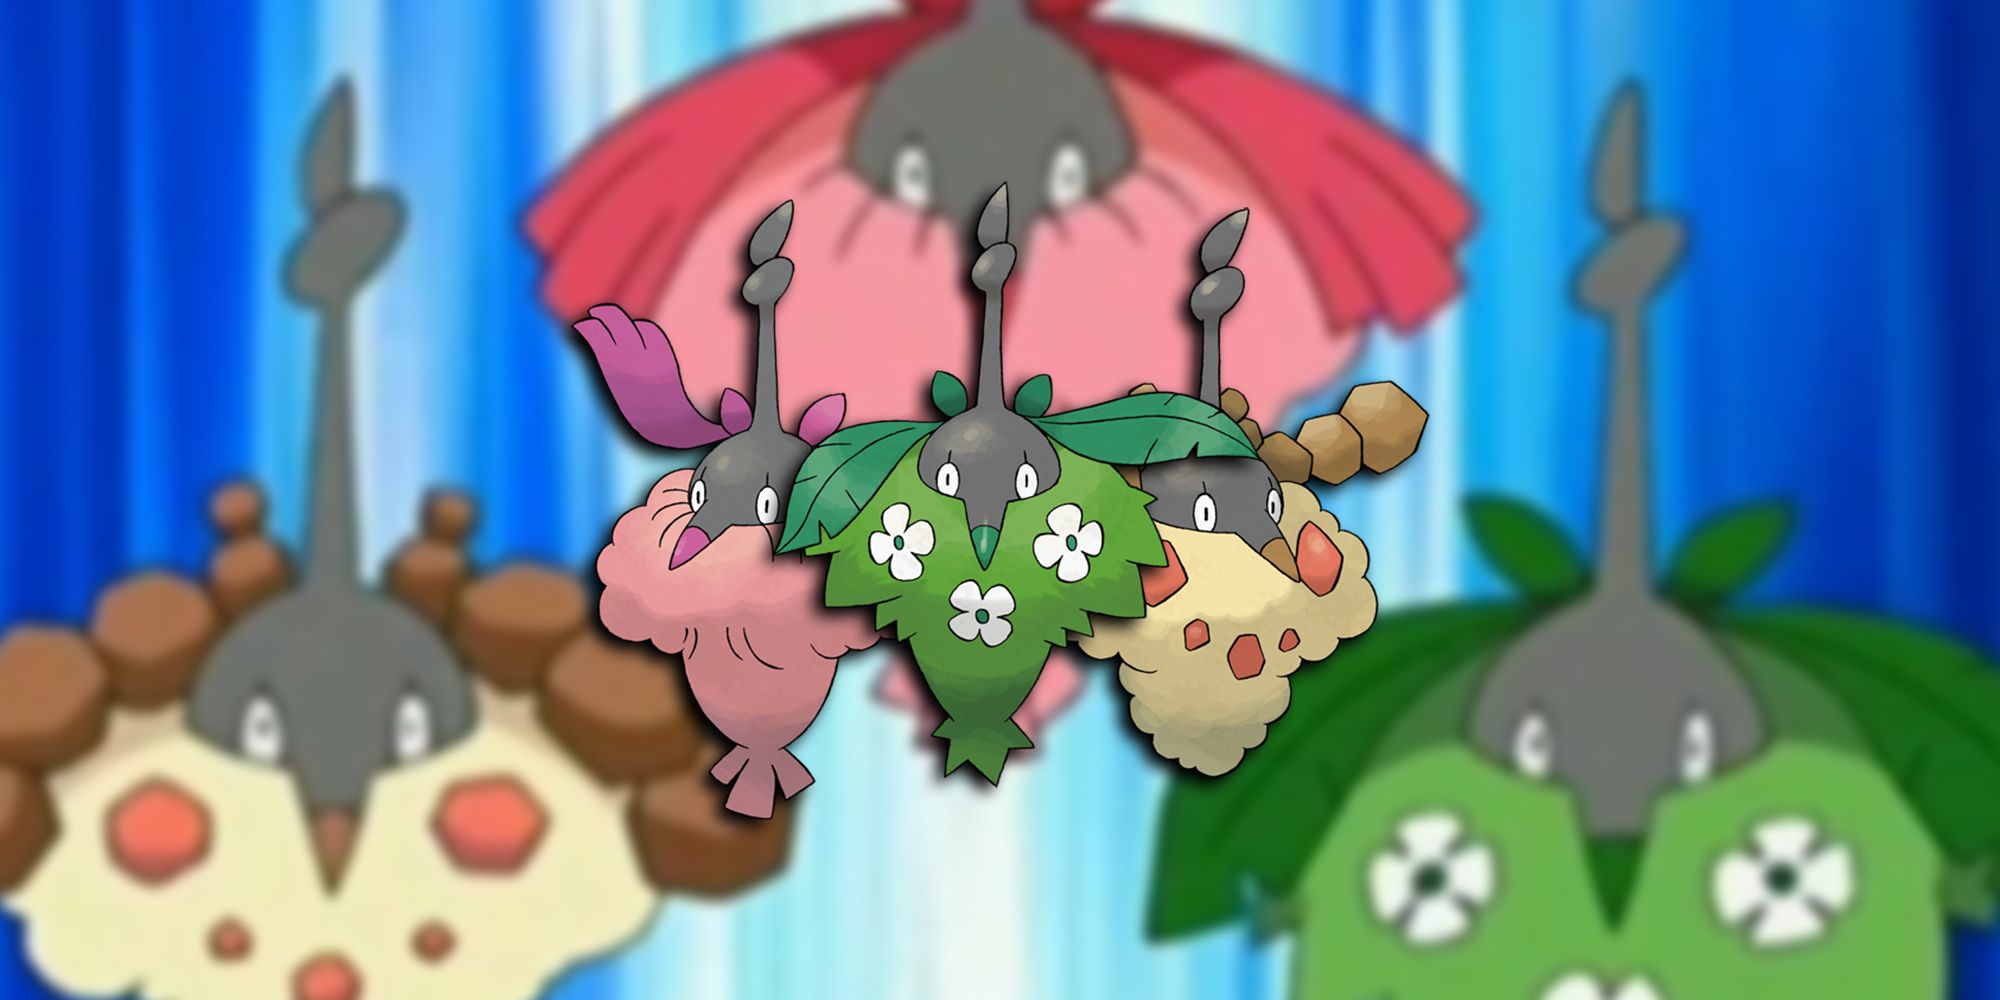 Pokemon - All Three Types of Wormadam Seen In Anime With Those Same Types Of Wormadam PNGs On Top